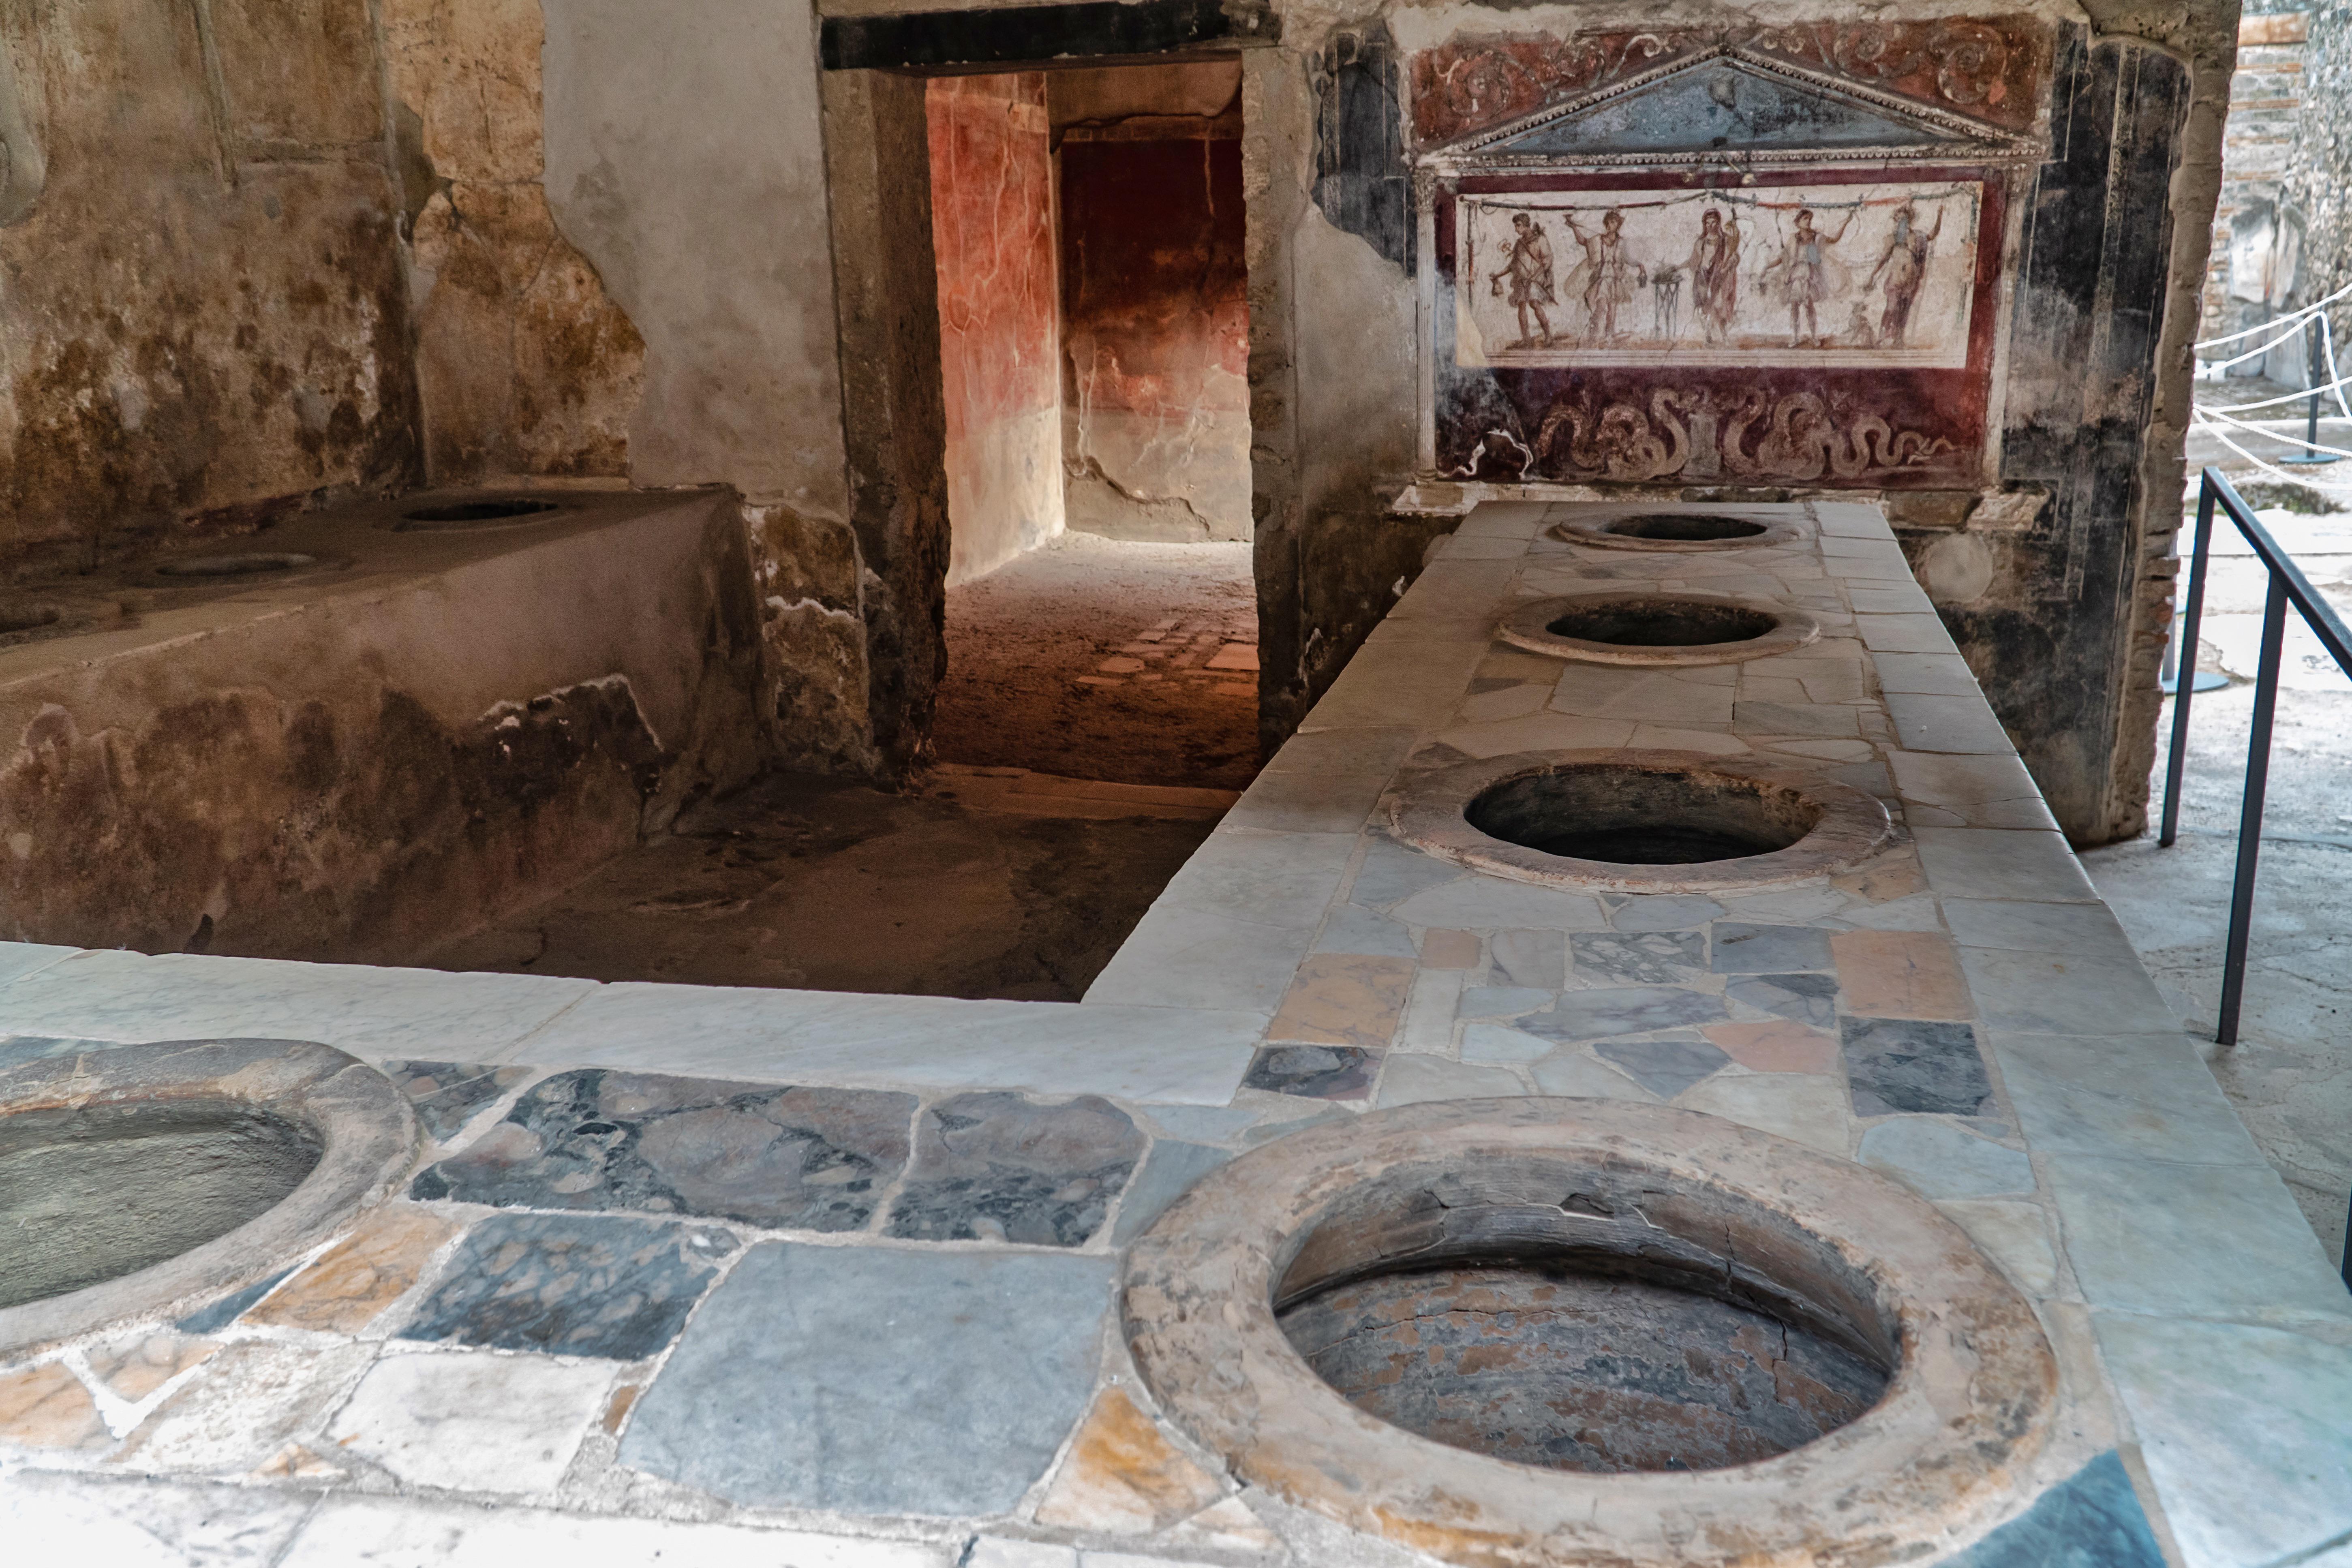 The owner of this Pompeii fast food restaurant stashed his earnings in a jar, likely before running off.jpg